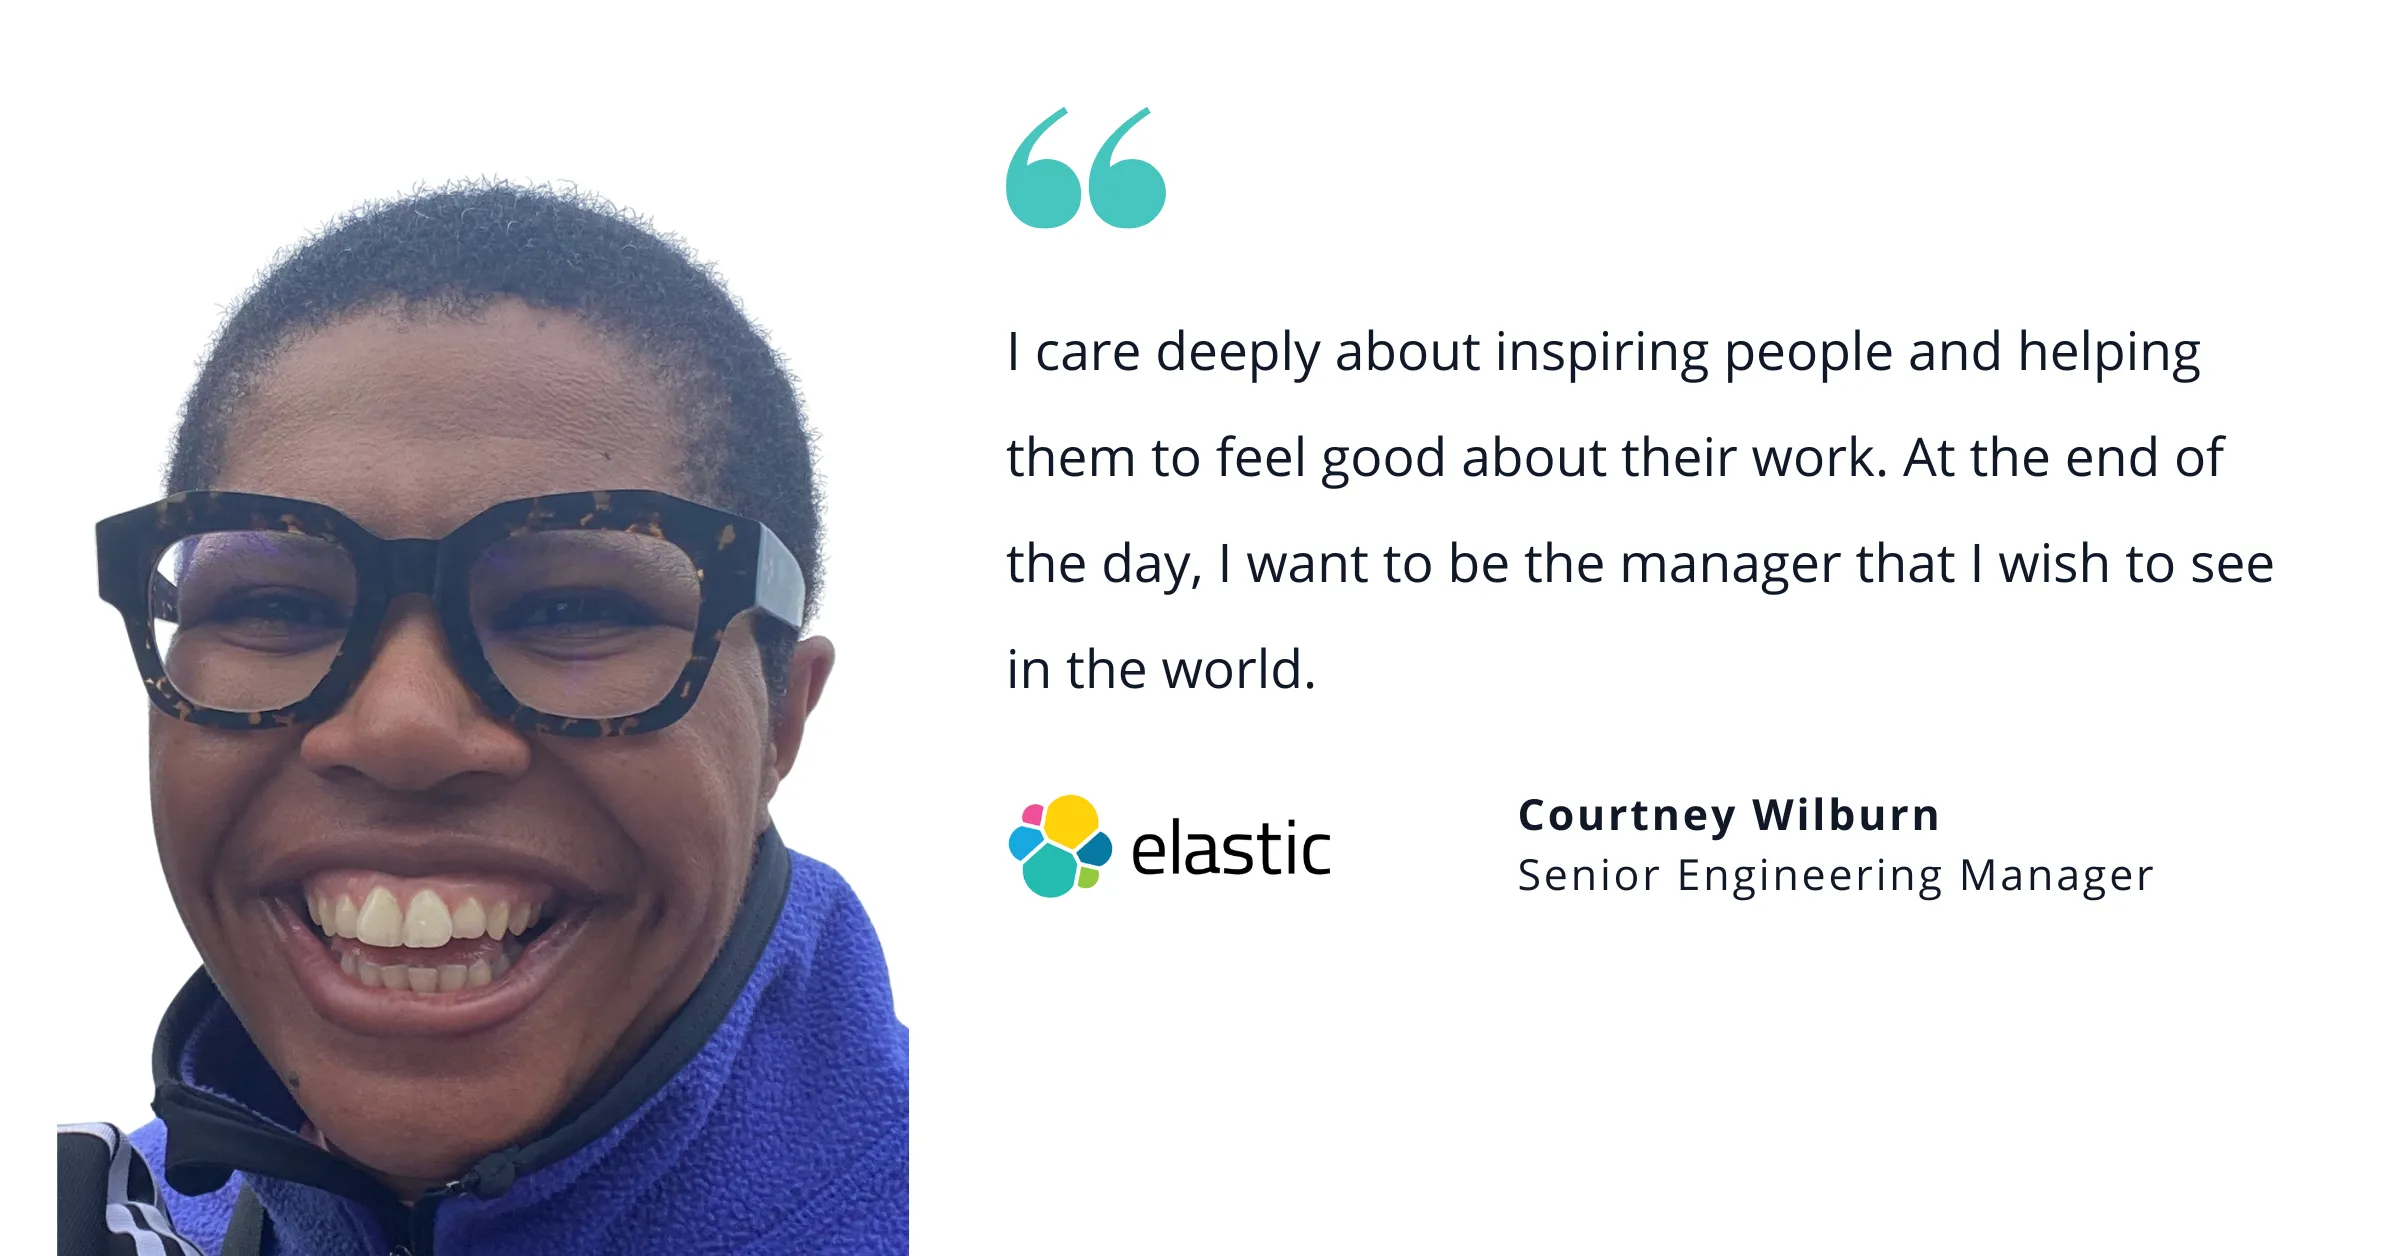 photo-of-elastic-s-courtney-wilburn-senior-engineering-manager-with-quote-saying-i-care-deeply-about-inspiring-people-and-he.webp